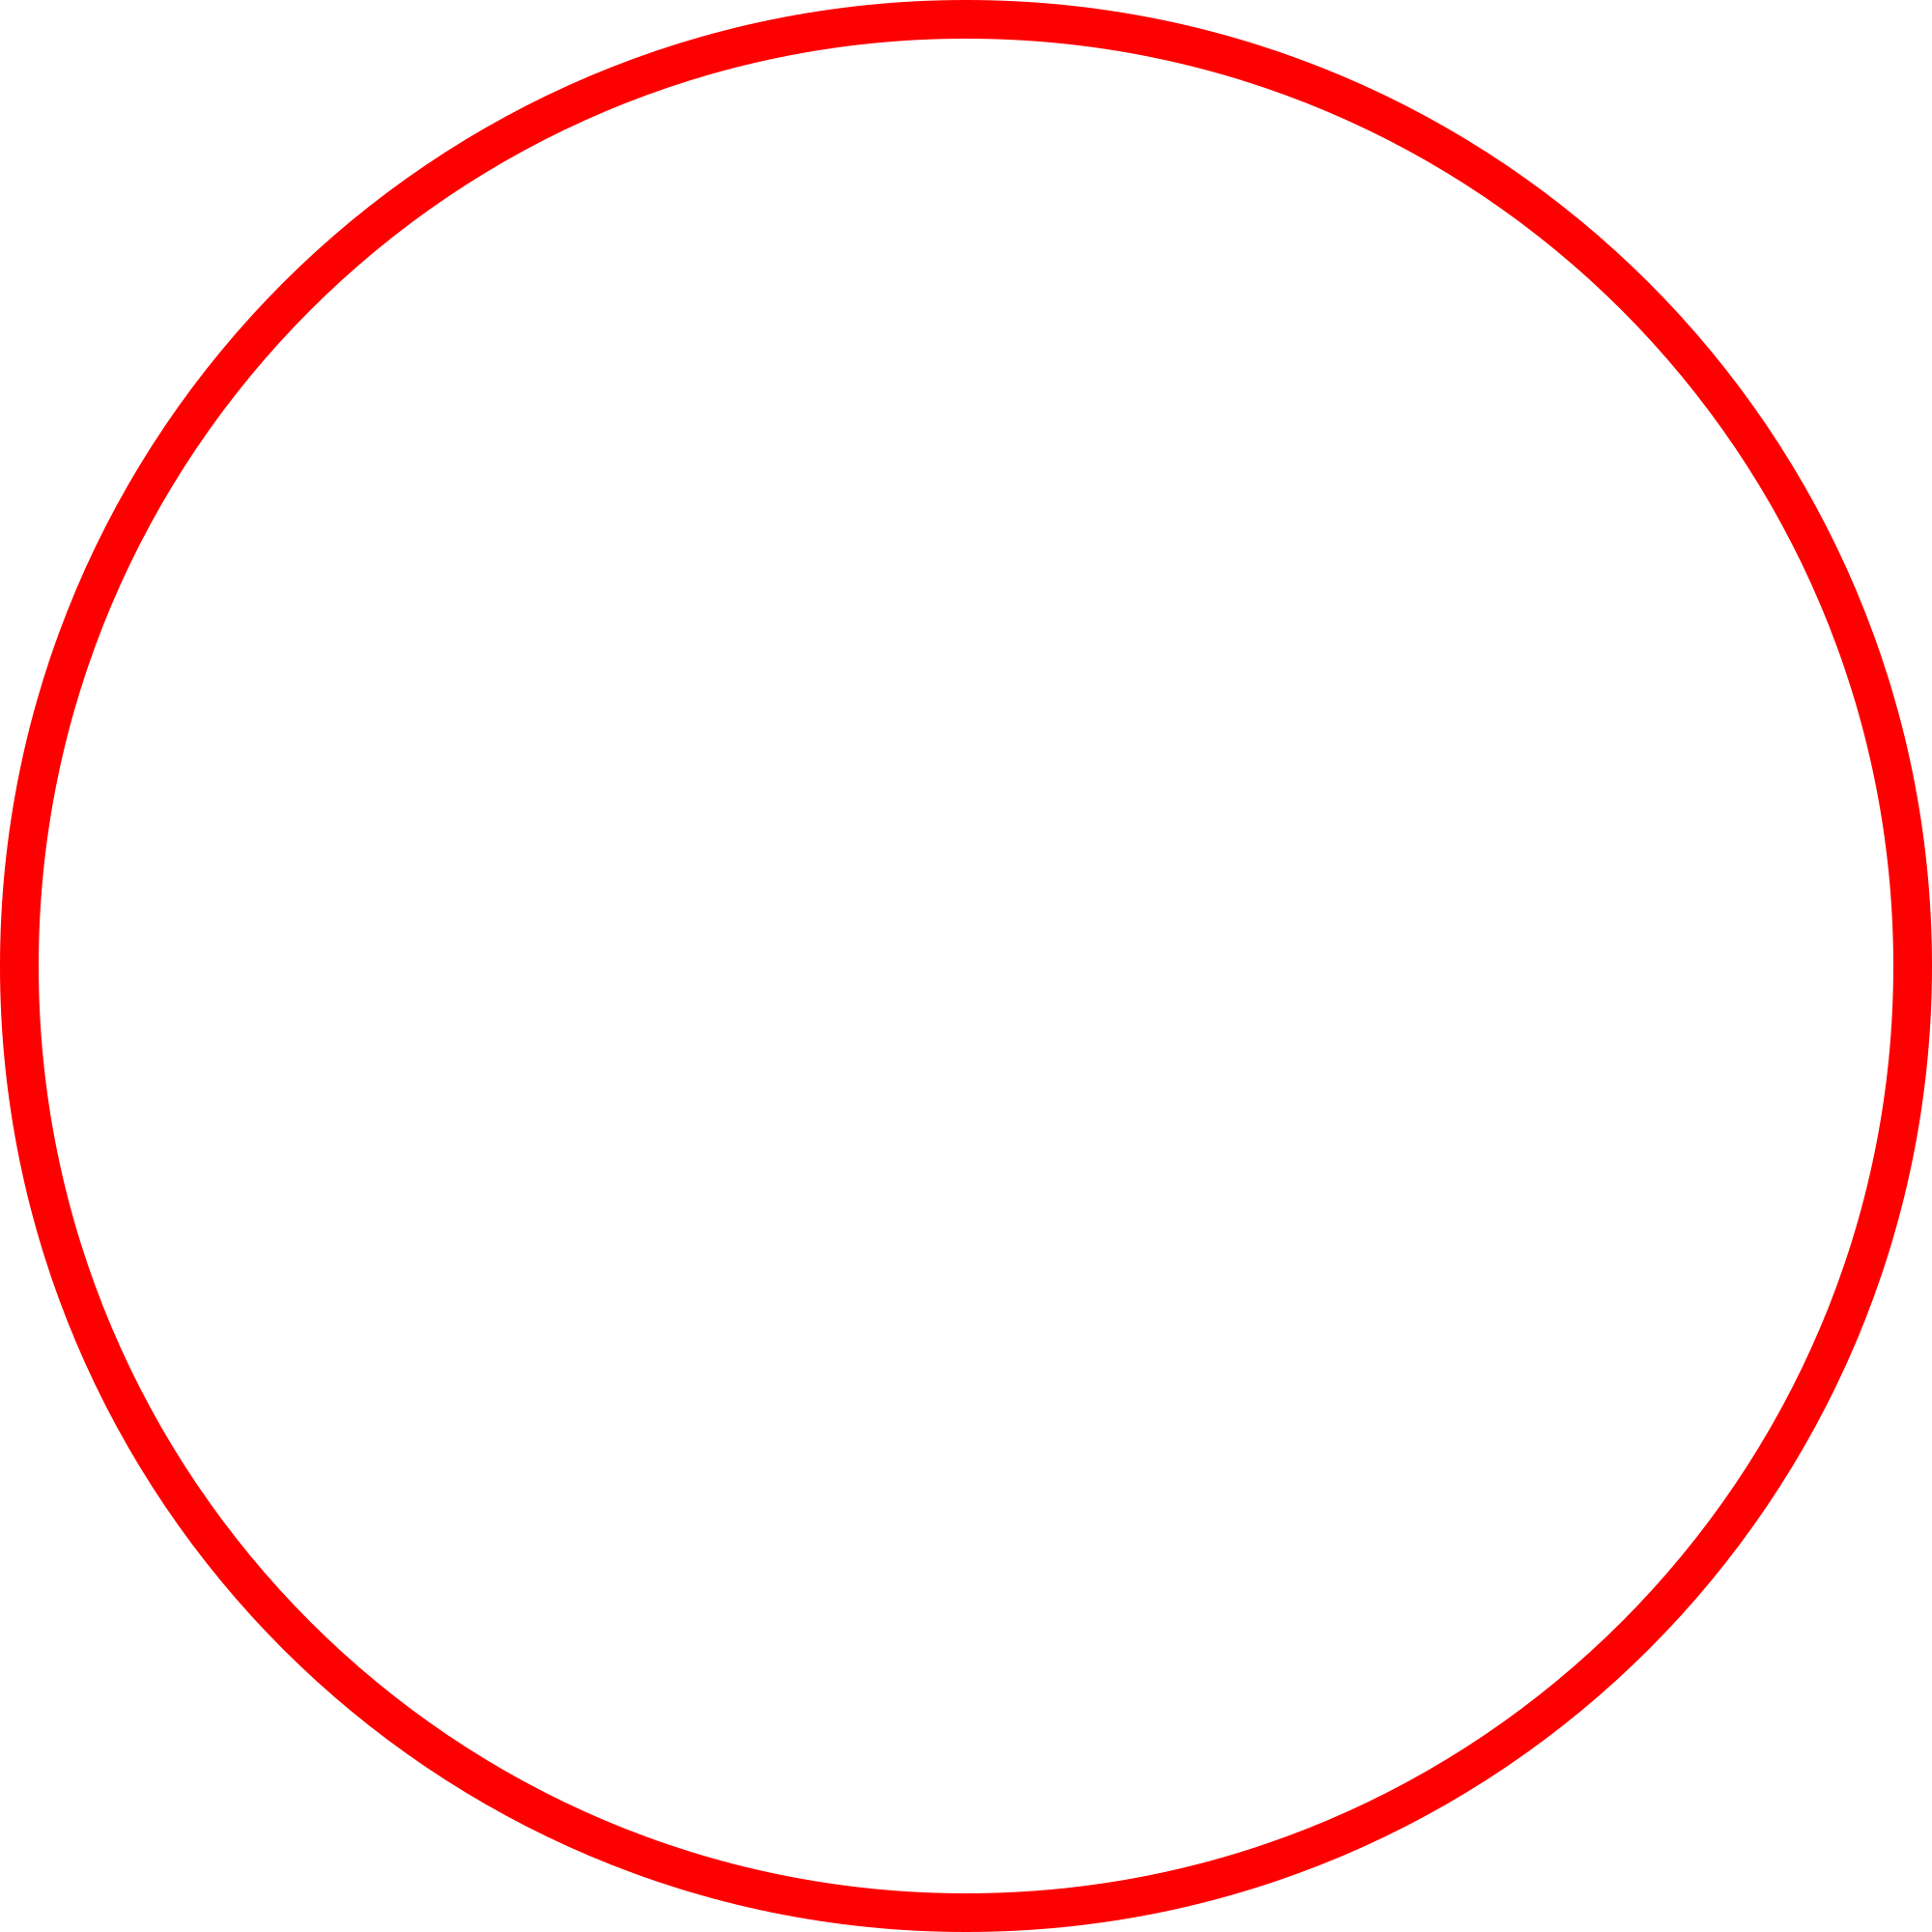 red circle logo with white lines